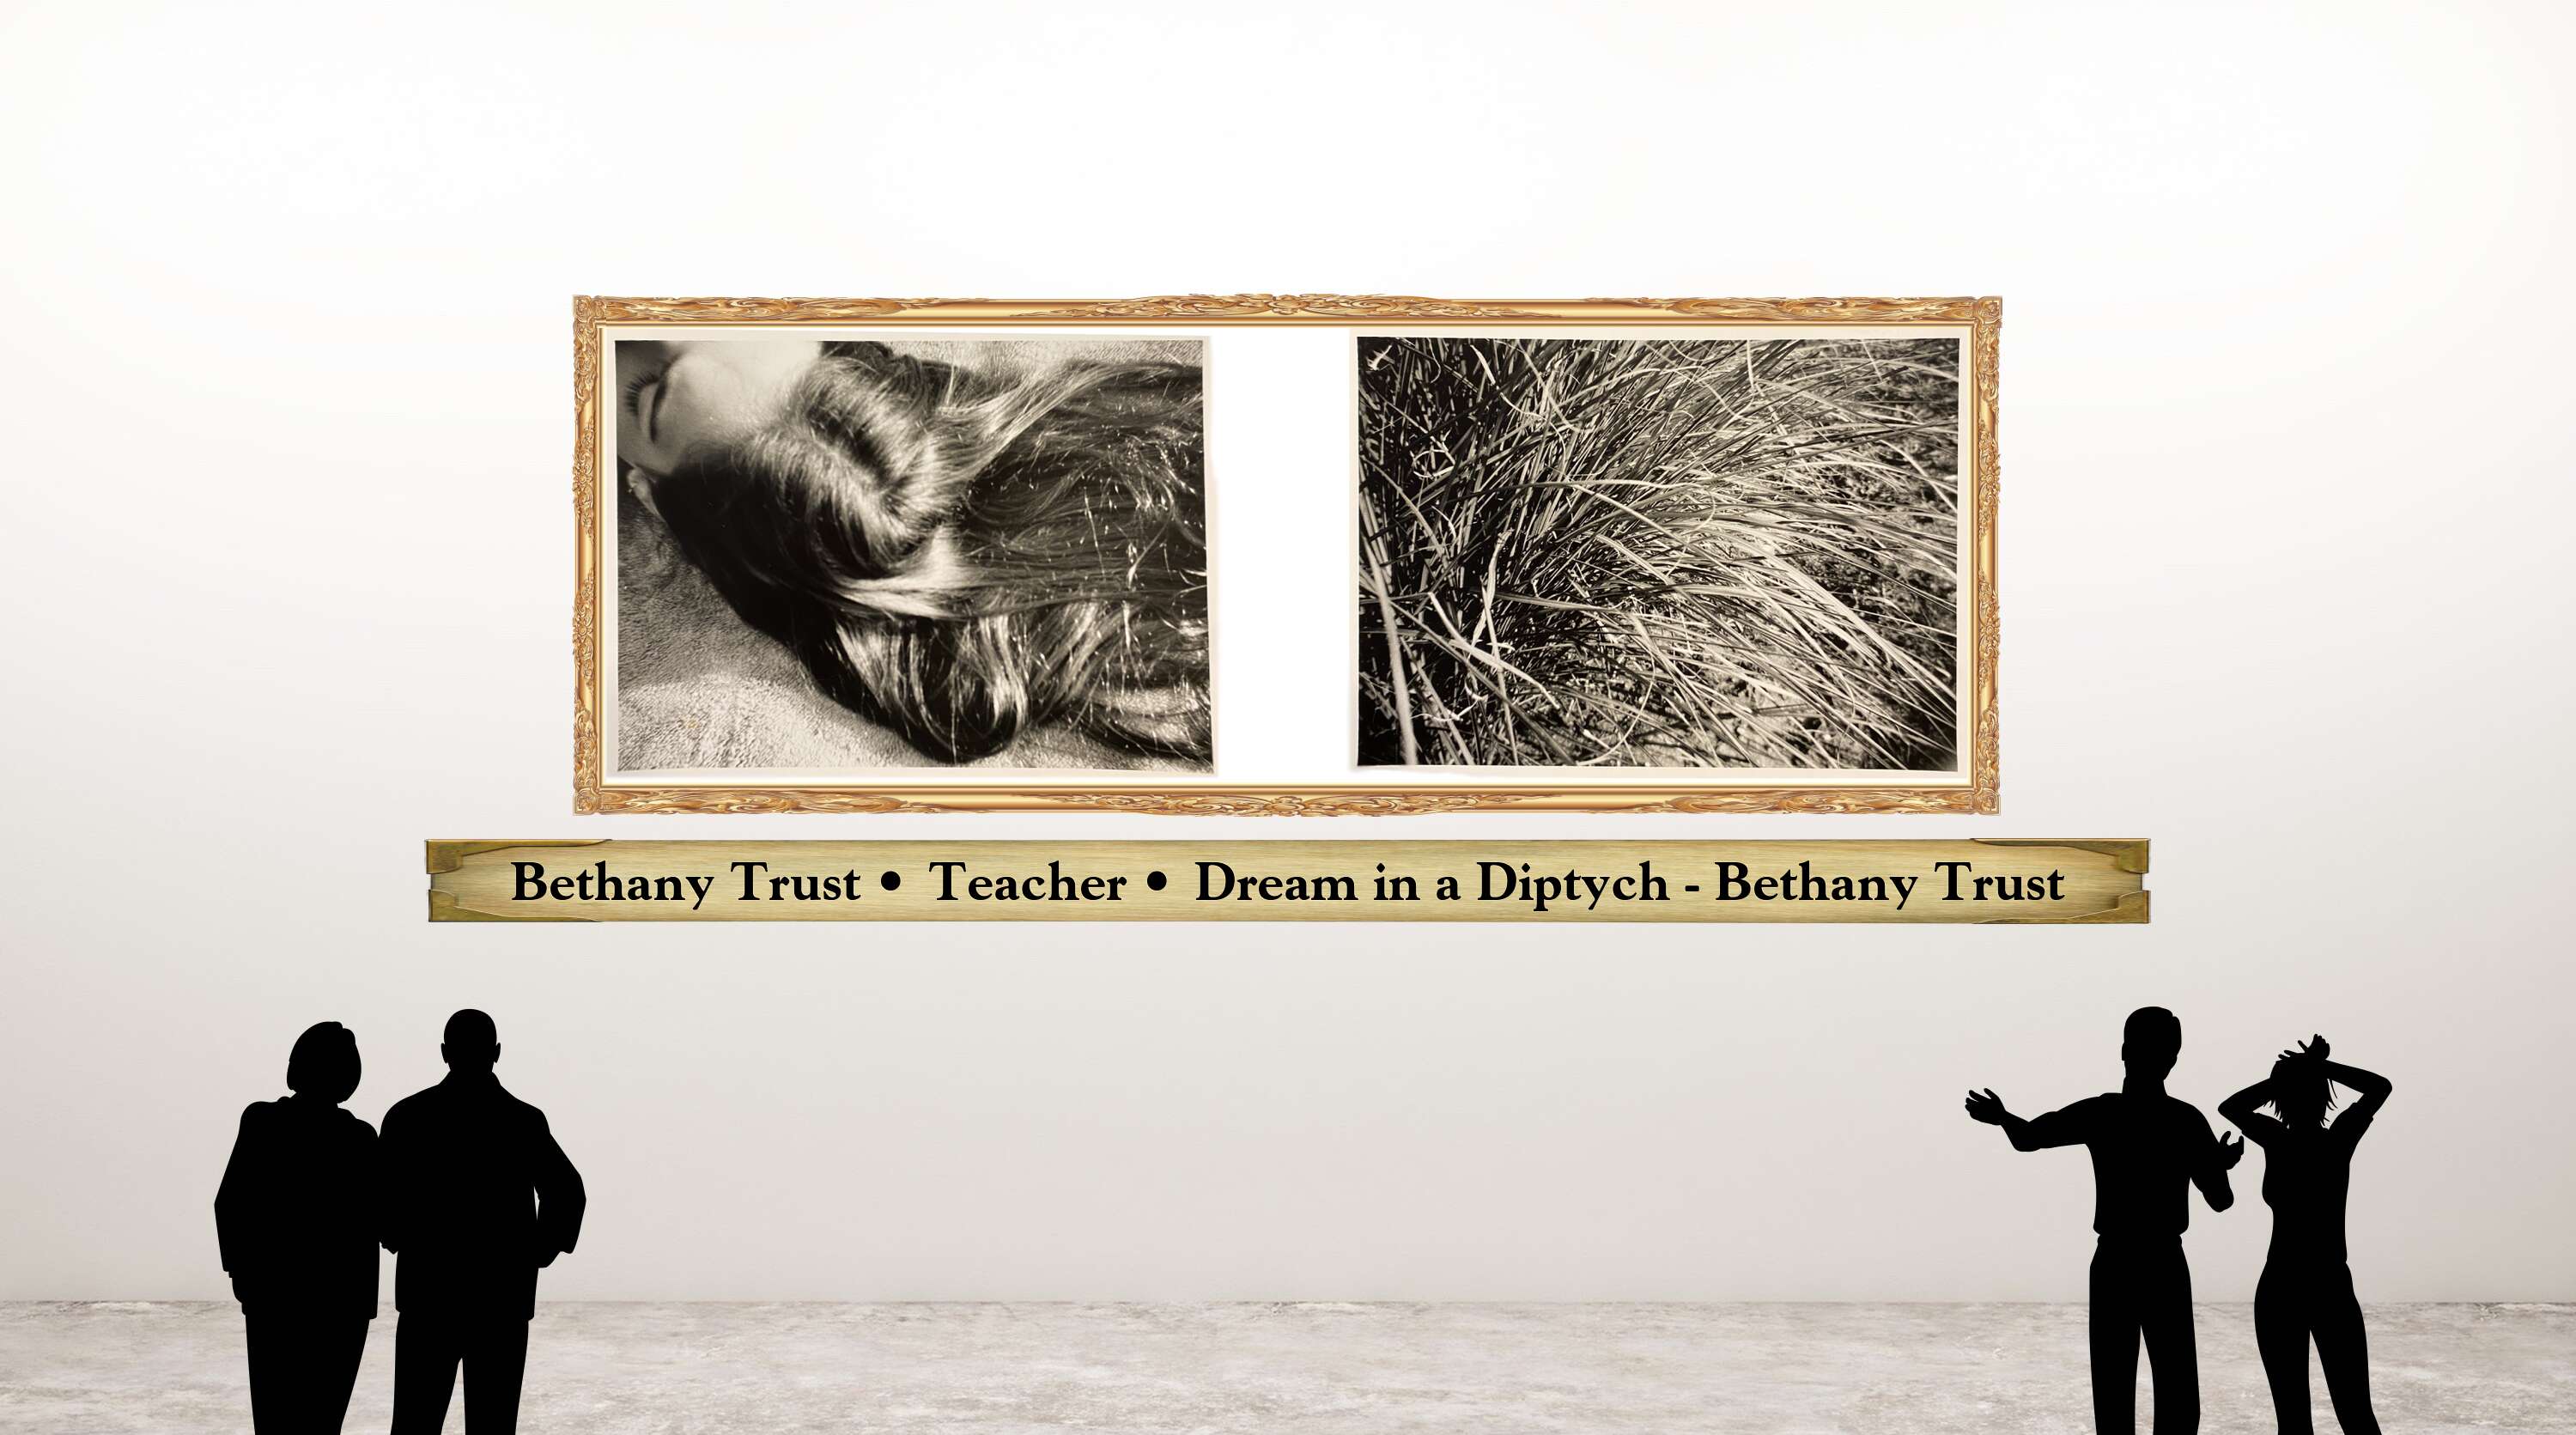 Bethany Trust • Teacher • Dream in a Diptych - Bethany Trust